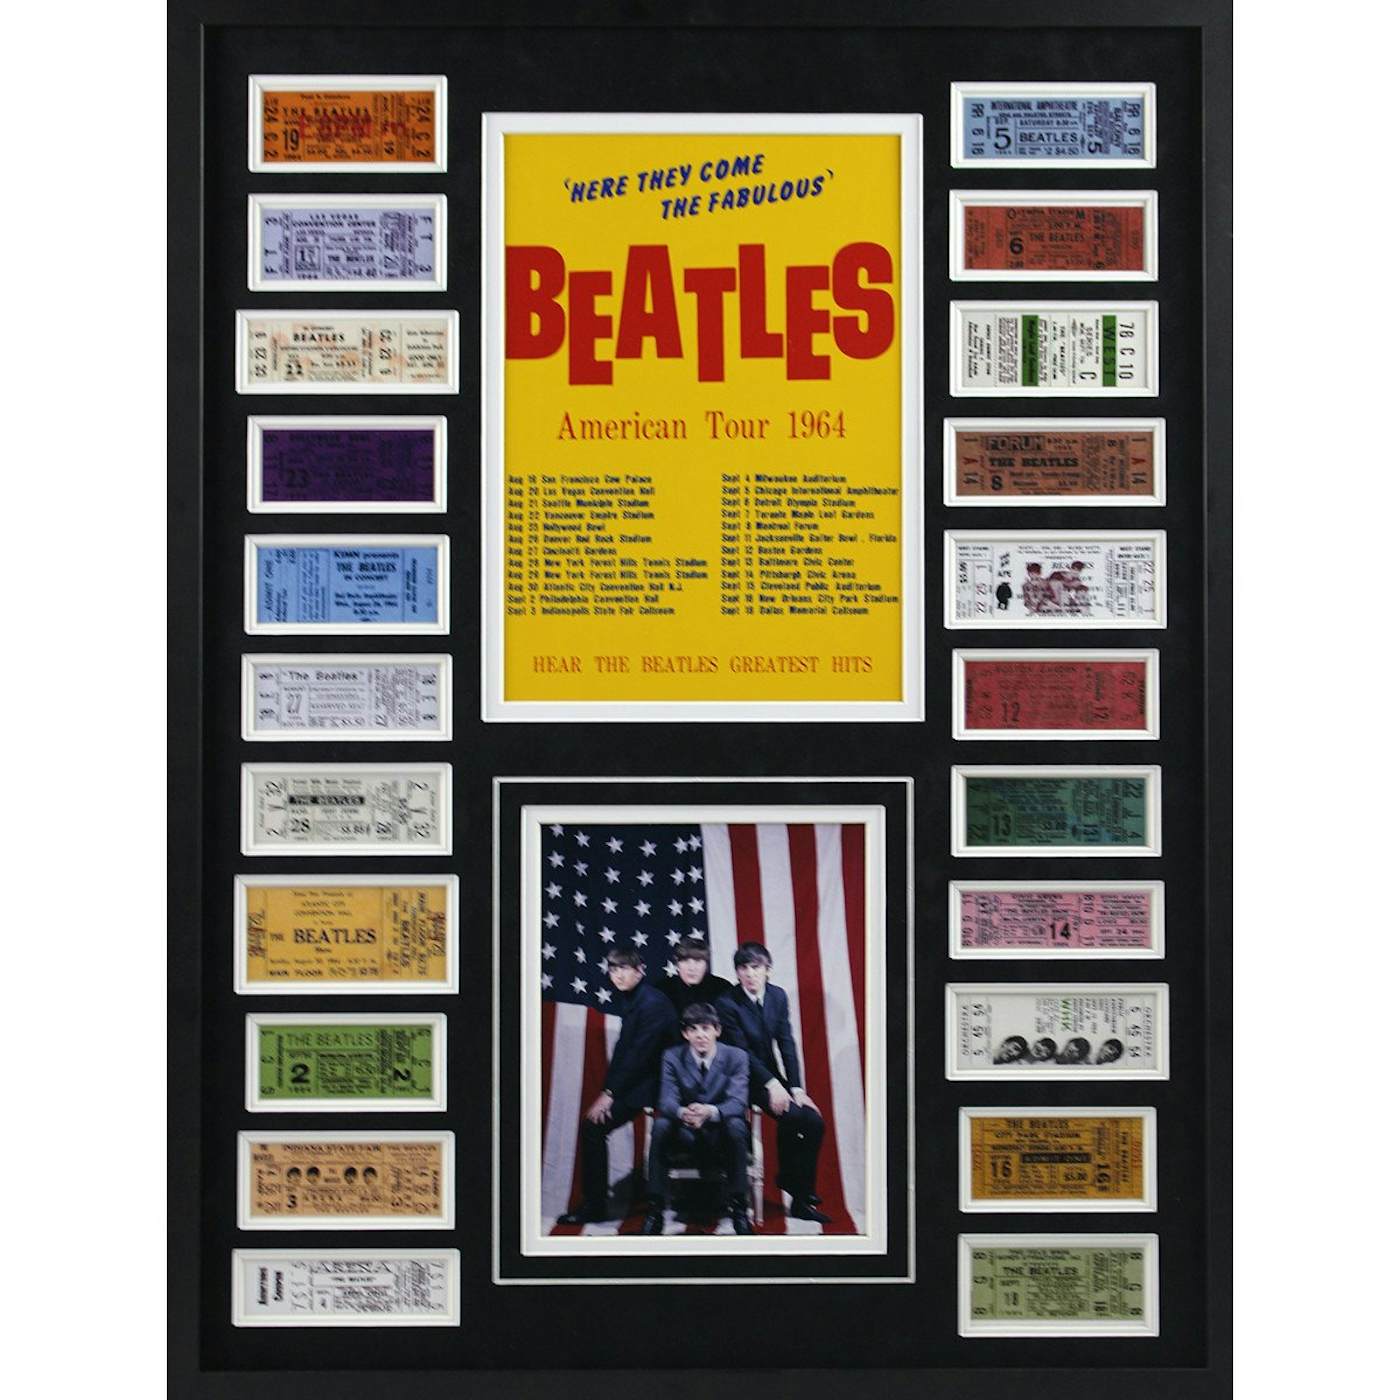 The Beatles American Tour 1964 Framed Ticket Collage 